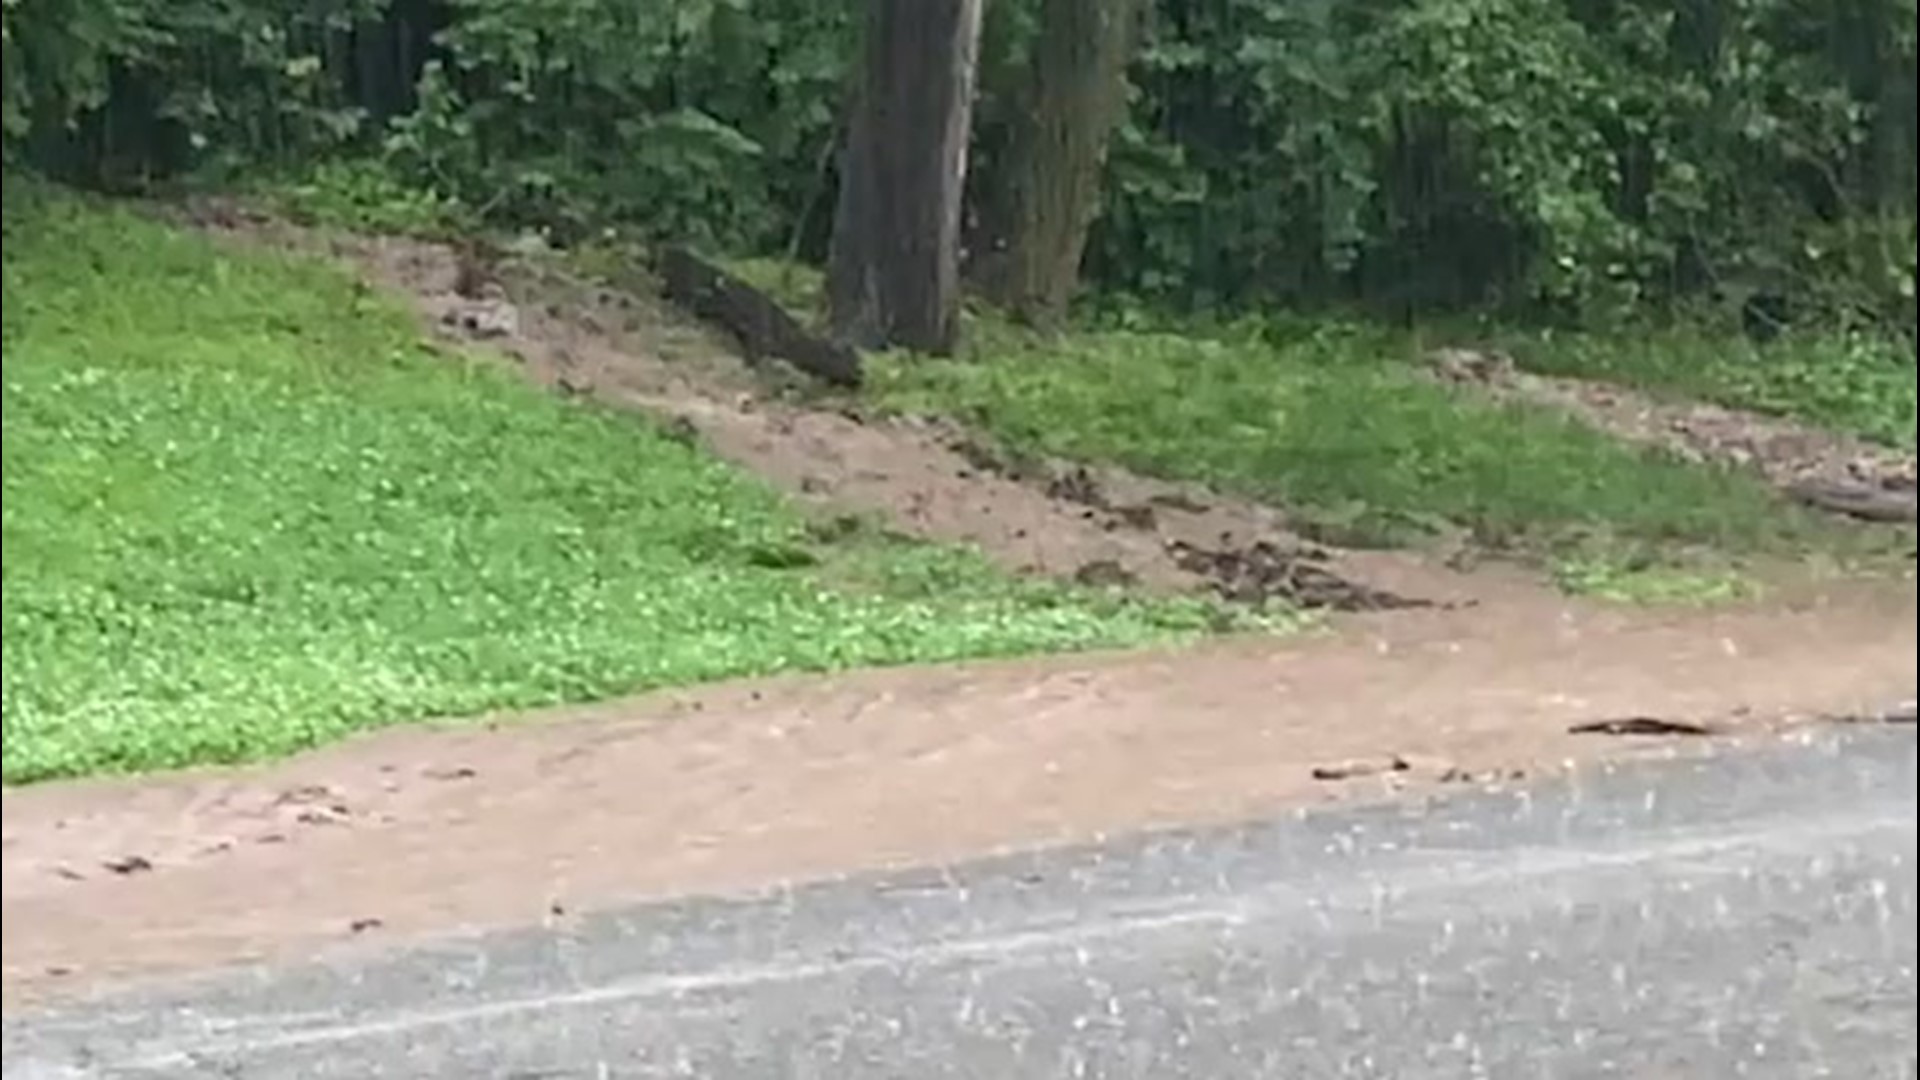 A rainstorm inundated the streets of Kansas City, Missouri, with floodwaters. Strong mudflows, like this one on video, spilled onto numerous roads on May 28.